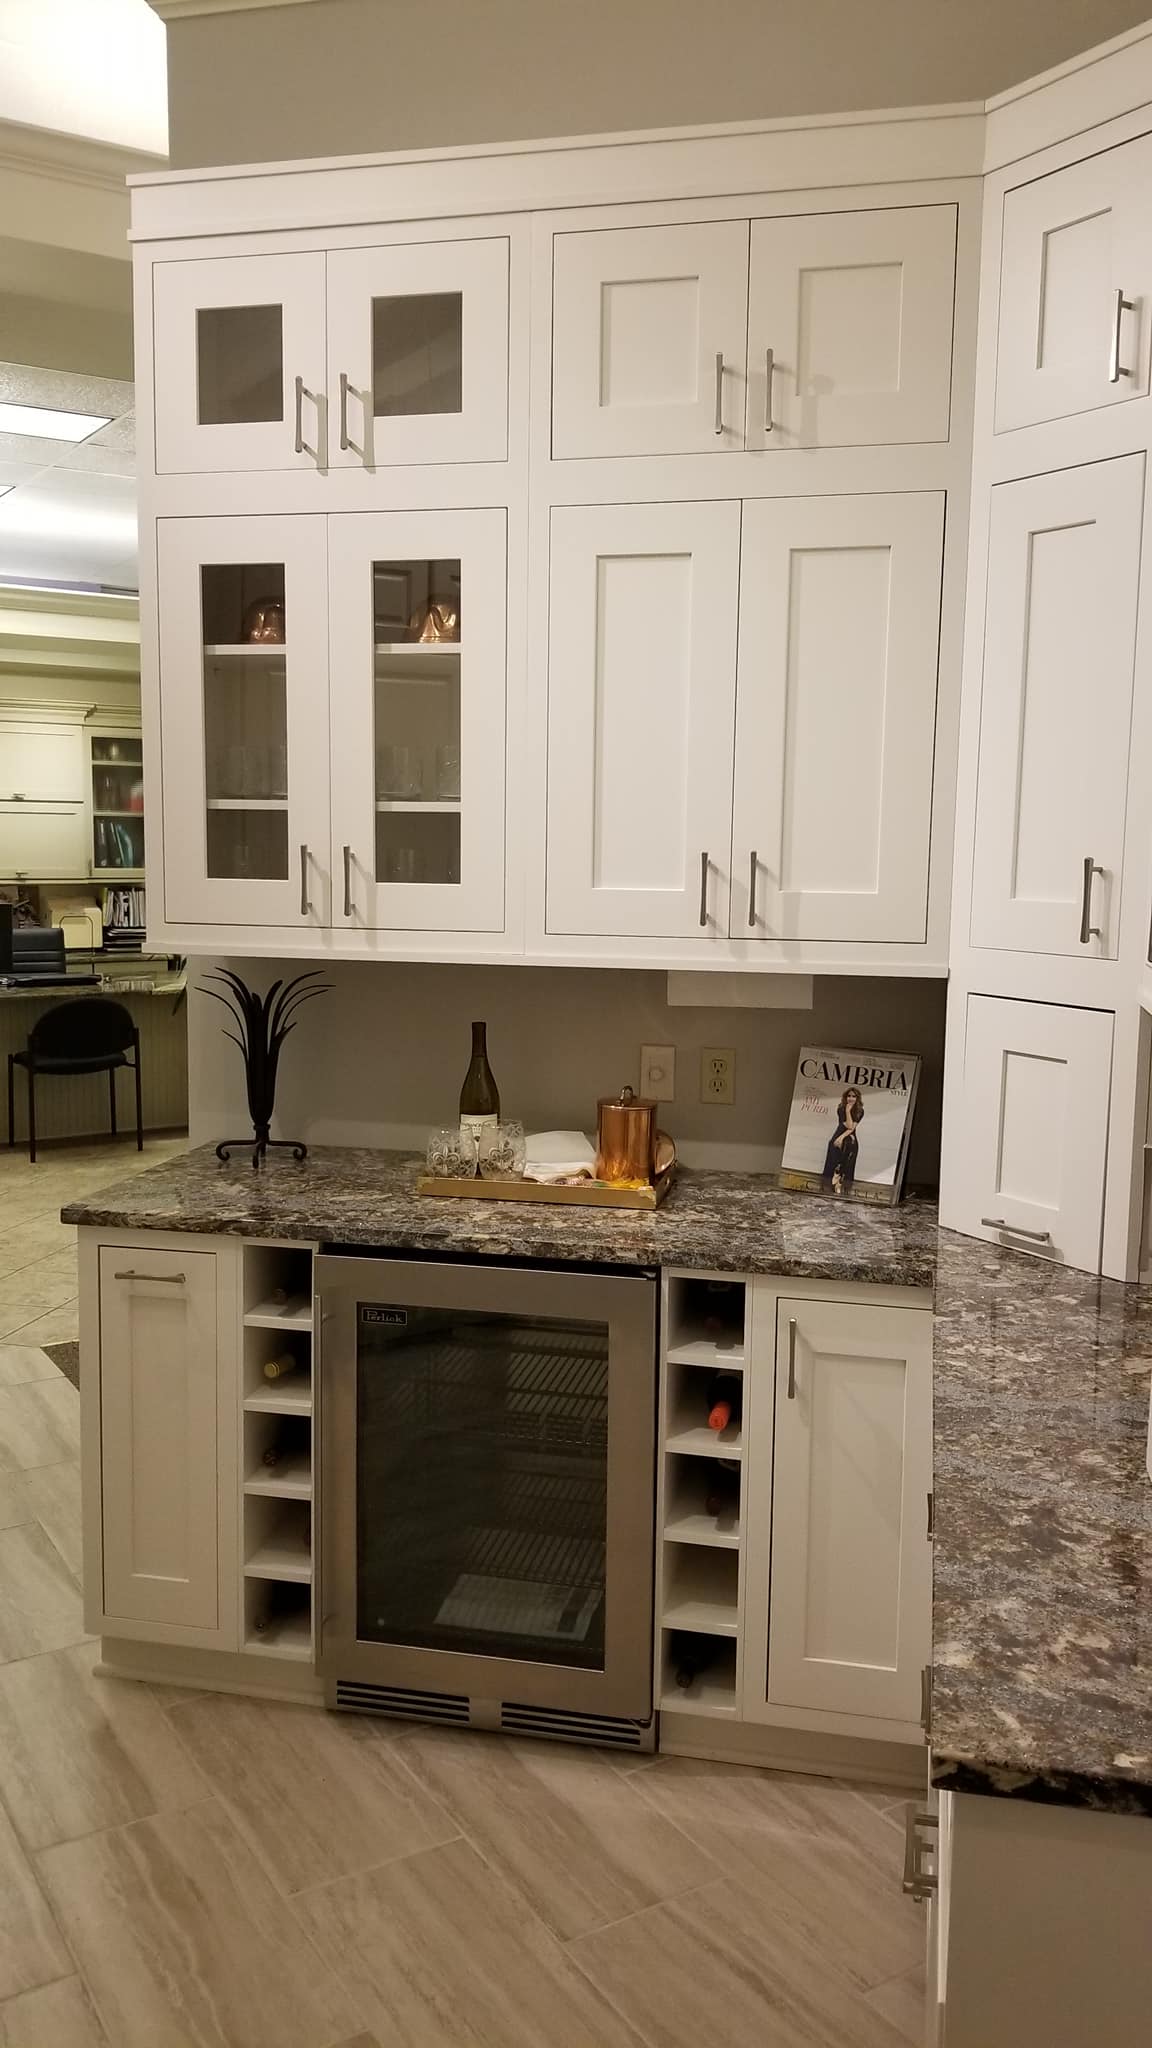 showroom cabinets display of glass front and white cabinets, wine cooler, granite countertop | Marchand Creative Kitchens Cabinets New Orleans Metairie Mandeville LA